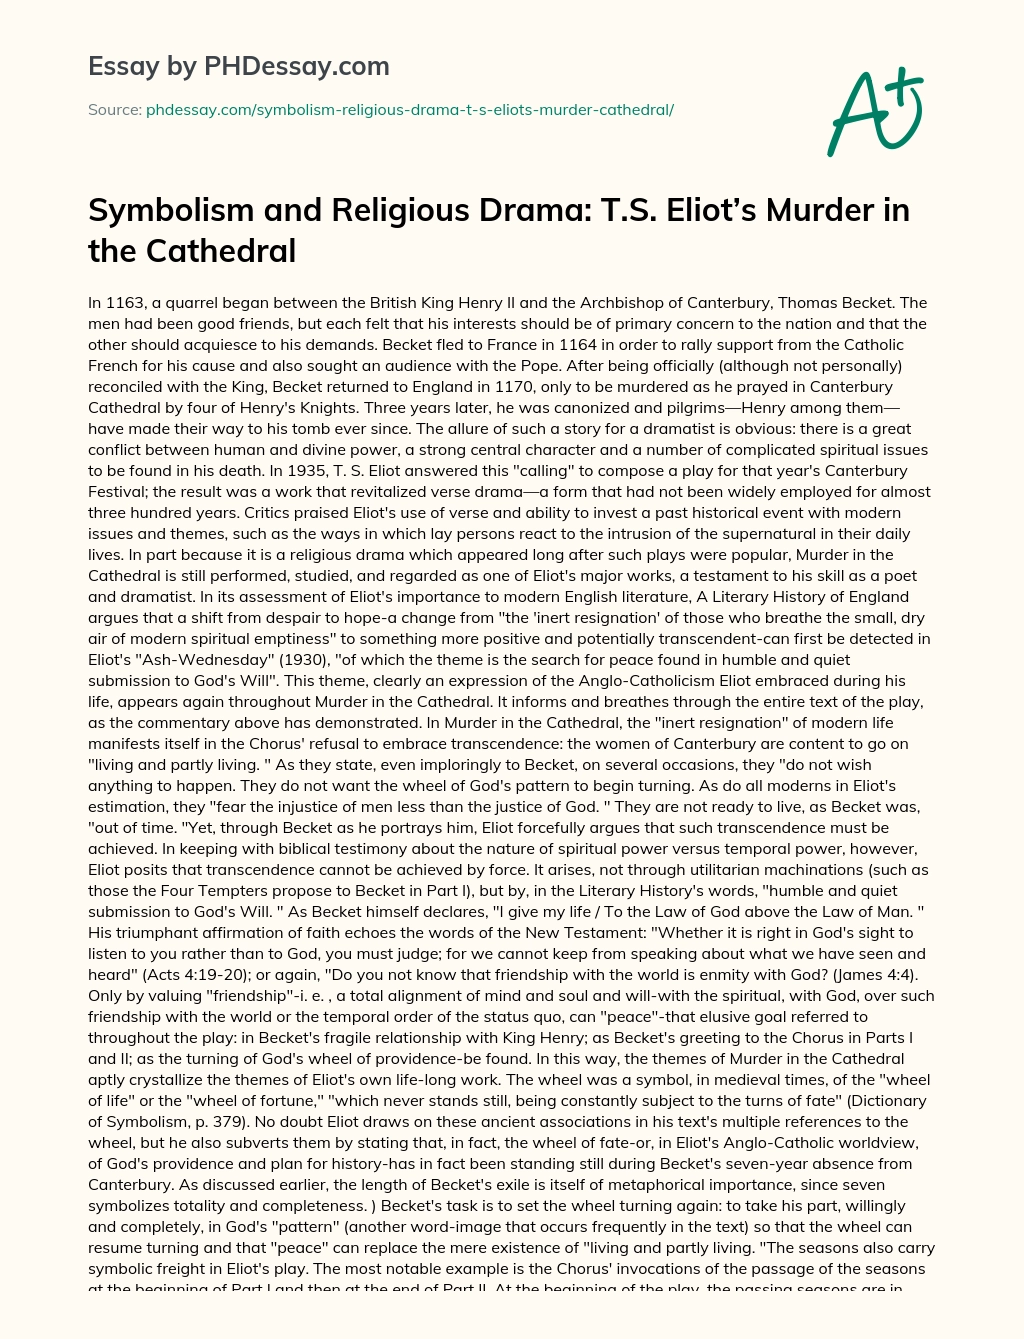 Symbolism and Religious Drama: T.S. Eliot’s Murder in the Cathedral essay